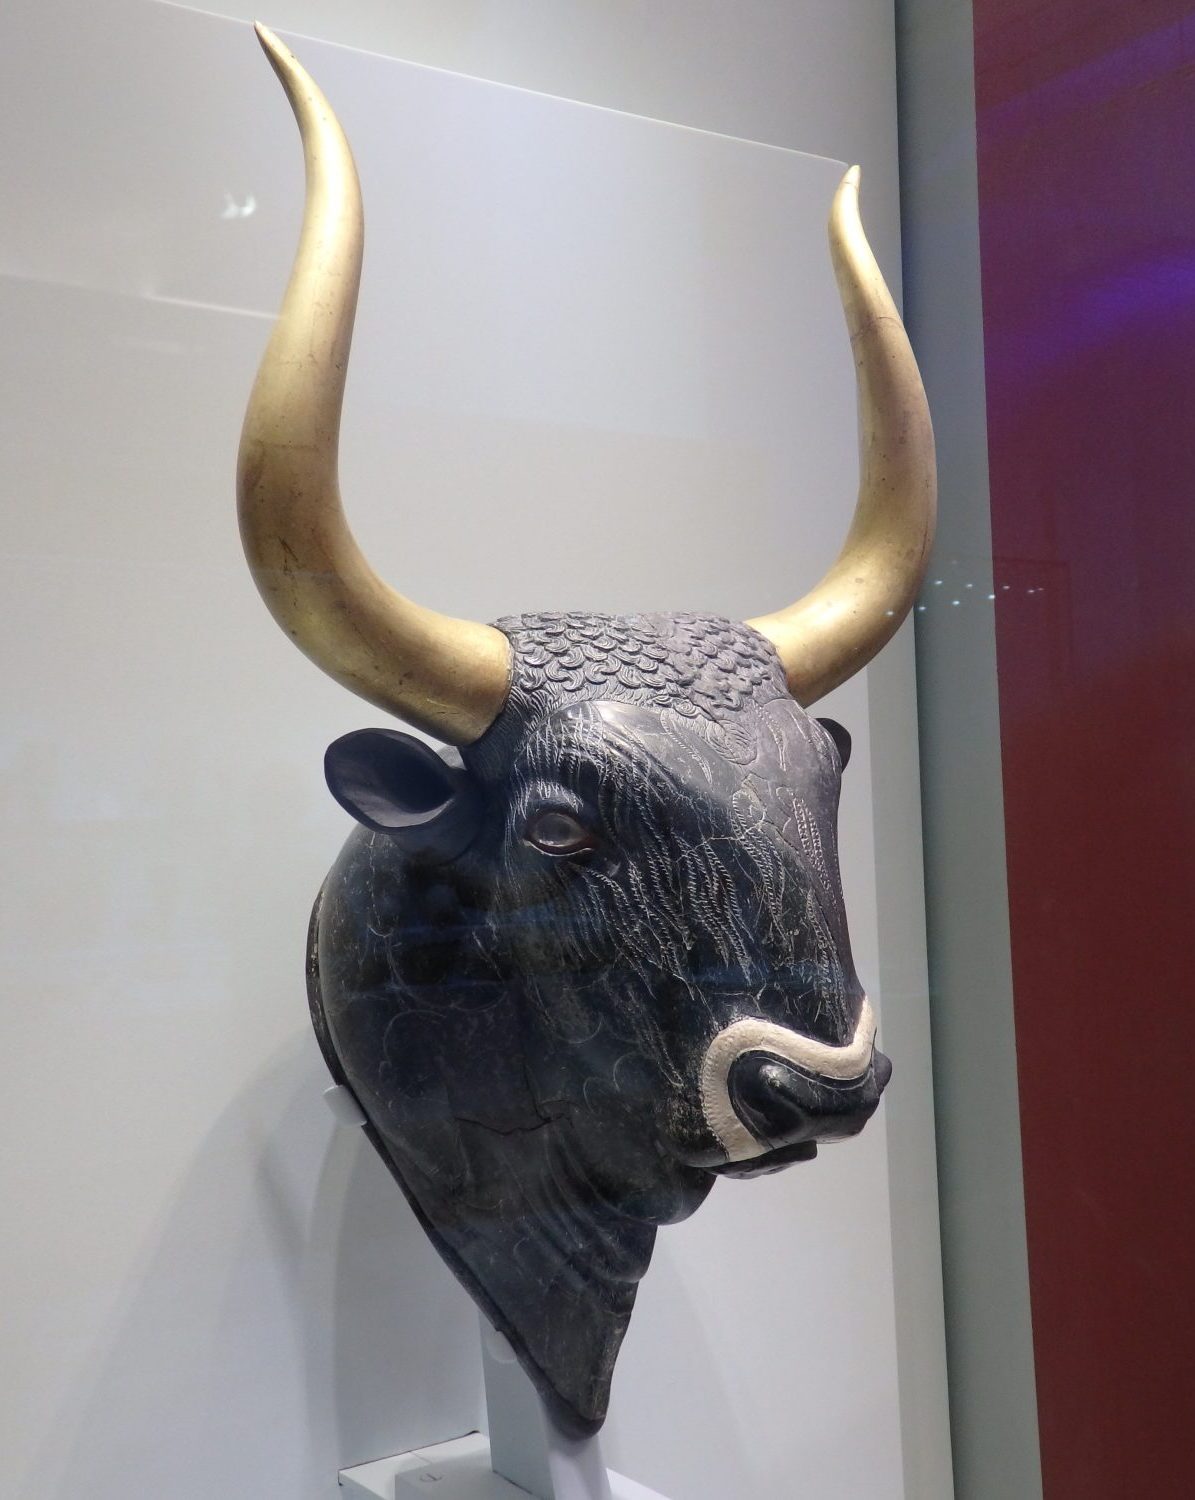 a bulls-head "rhyton" from Knossos, apparently used for libations. It can be filled through a hole in the neck and the liquid can be poured out through the snout. Carved from stone, with inlays of shell, rock crystal and red jasper.